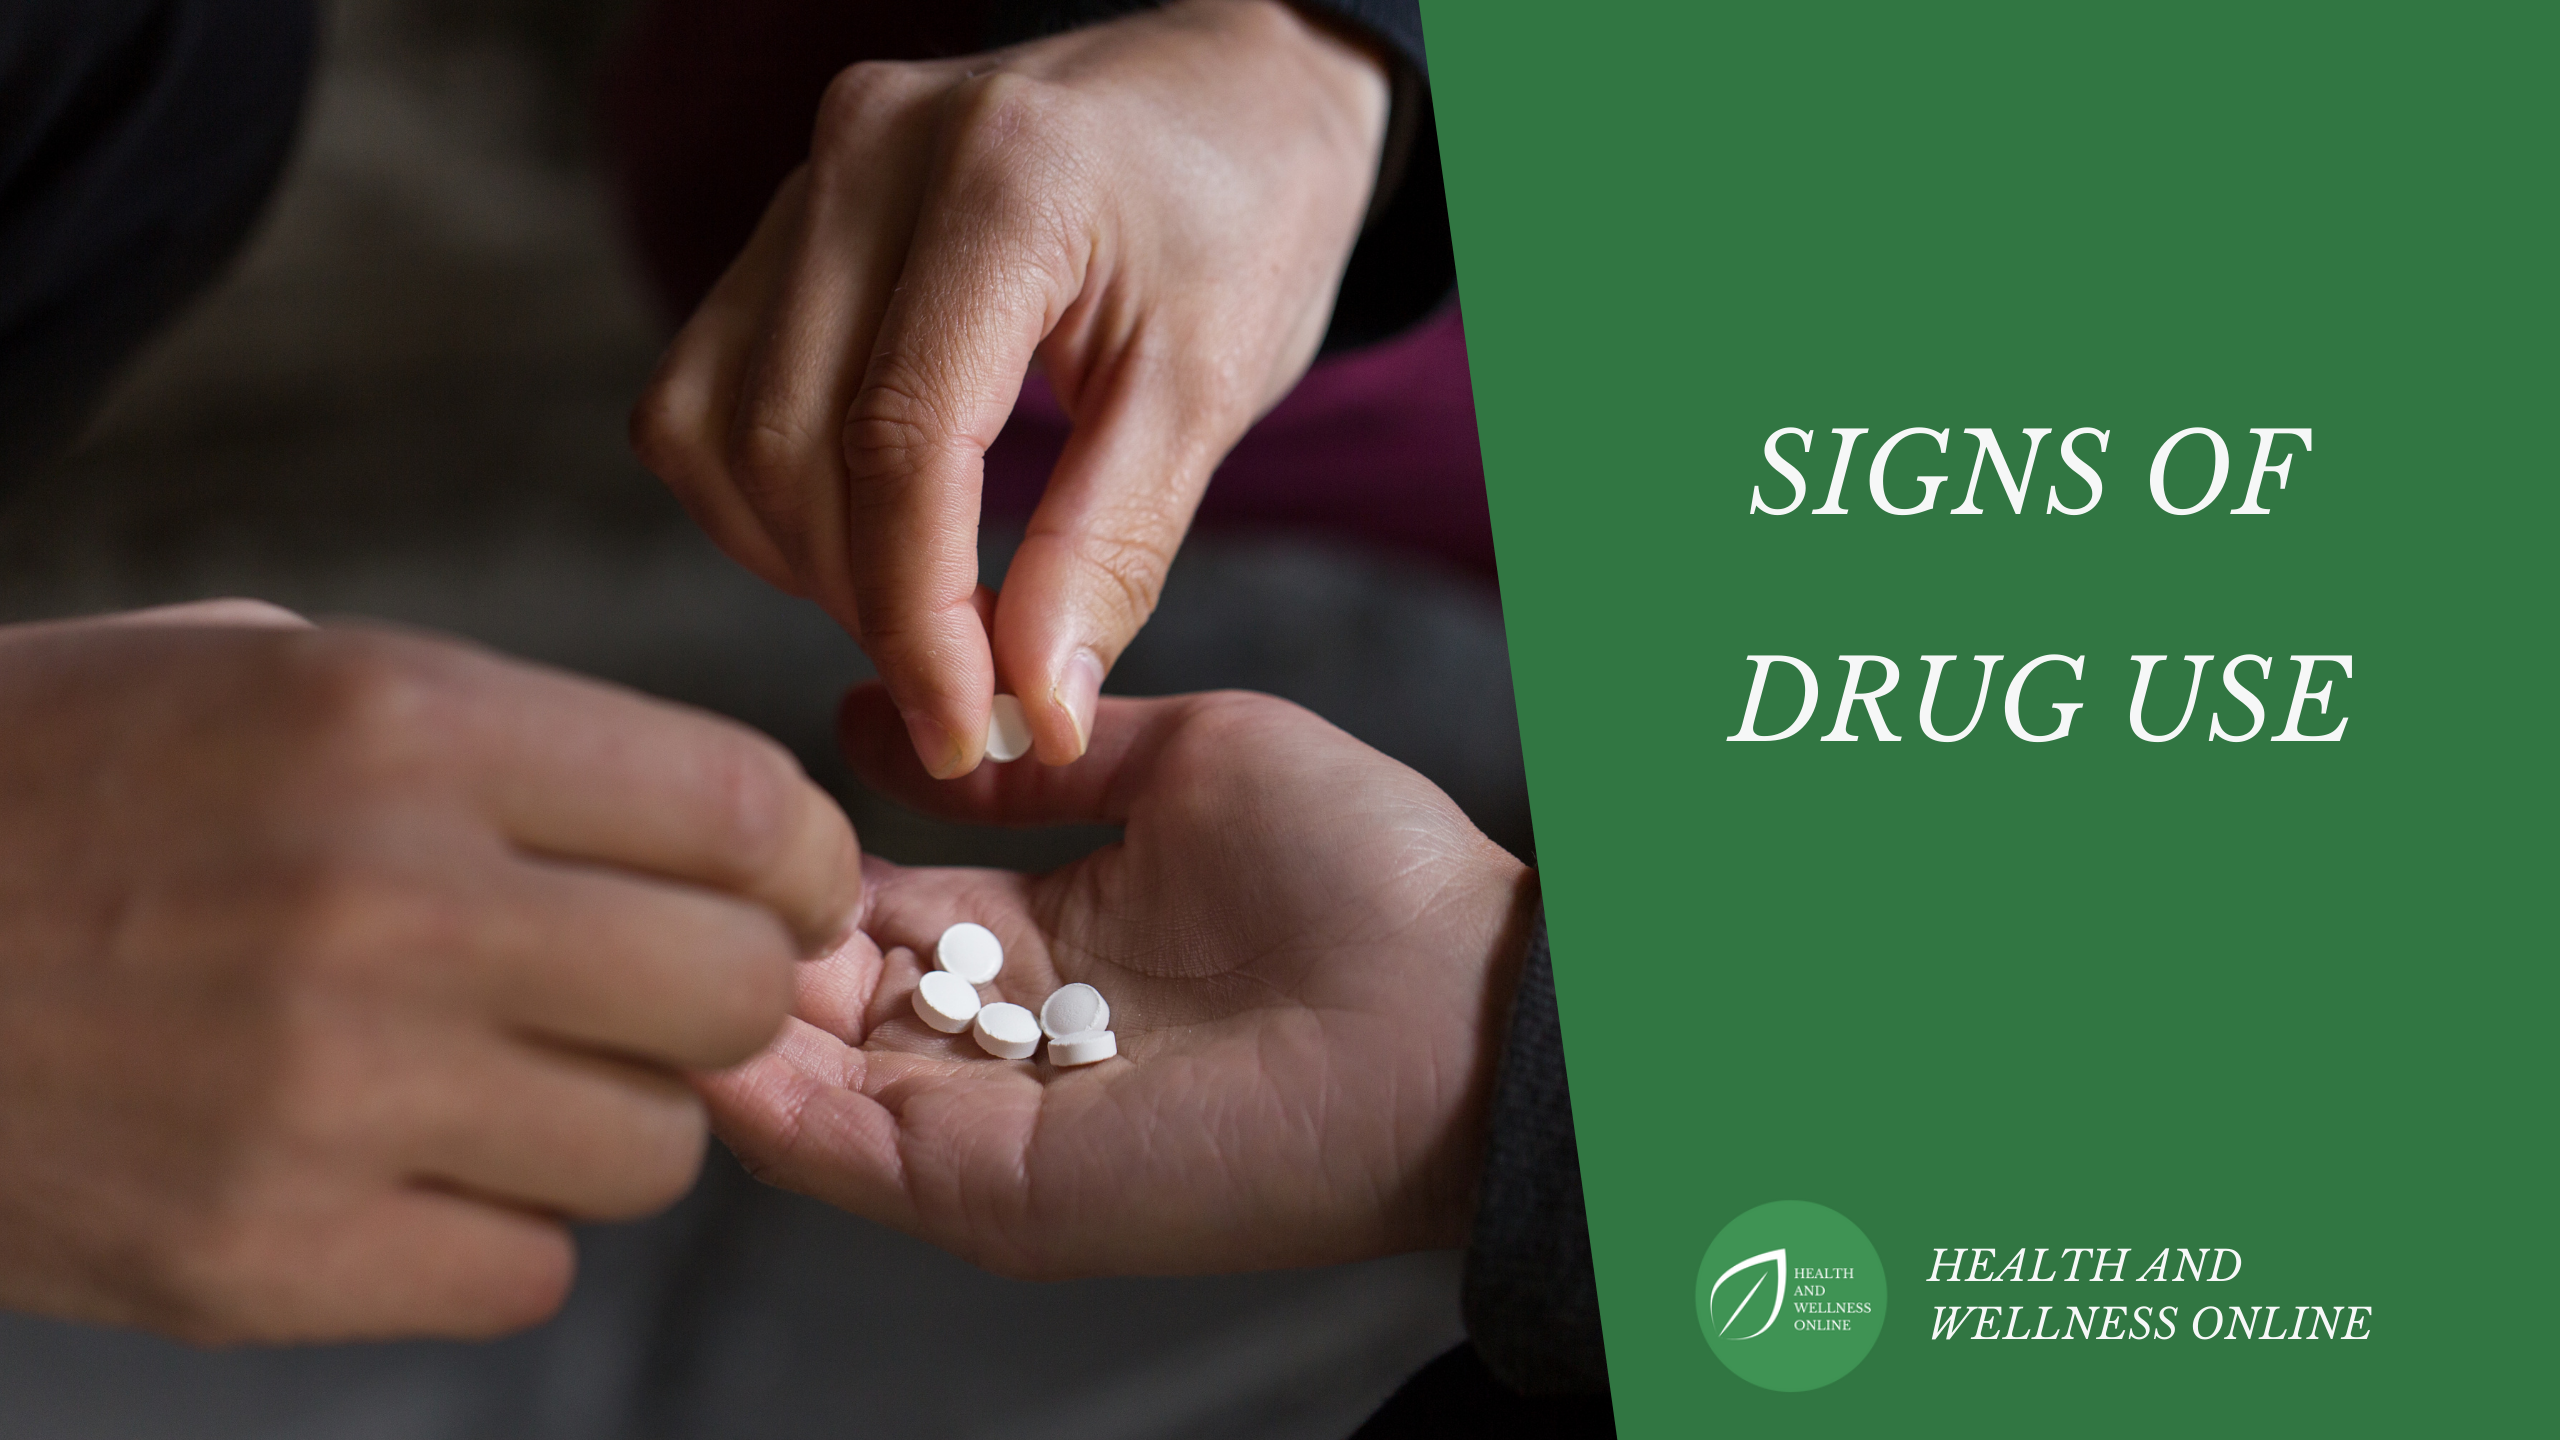 Signs of Drug Use is a prevention course by Dr. Donna Poppendieck.